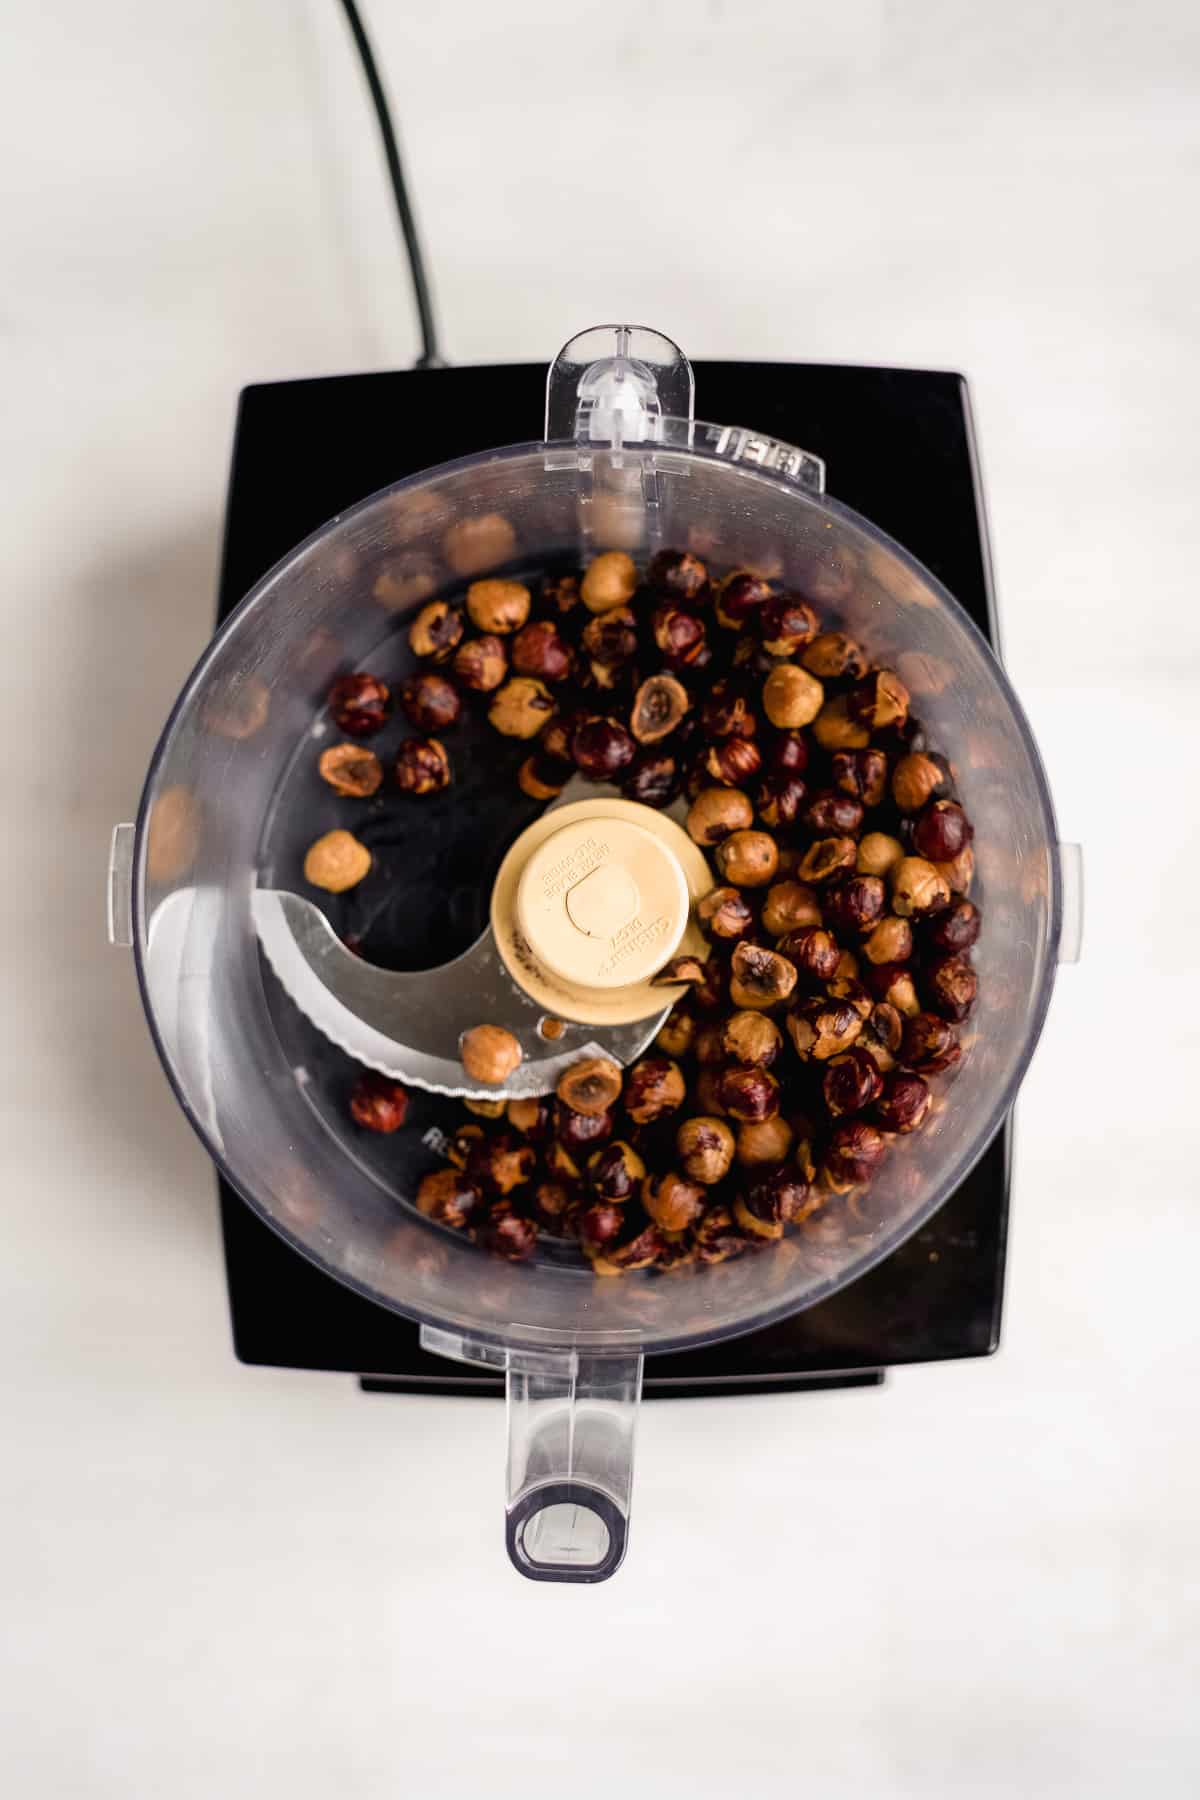 Hazelnuts in a food processor about to be blended.